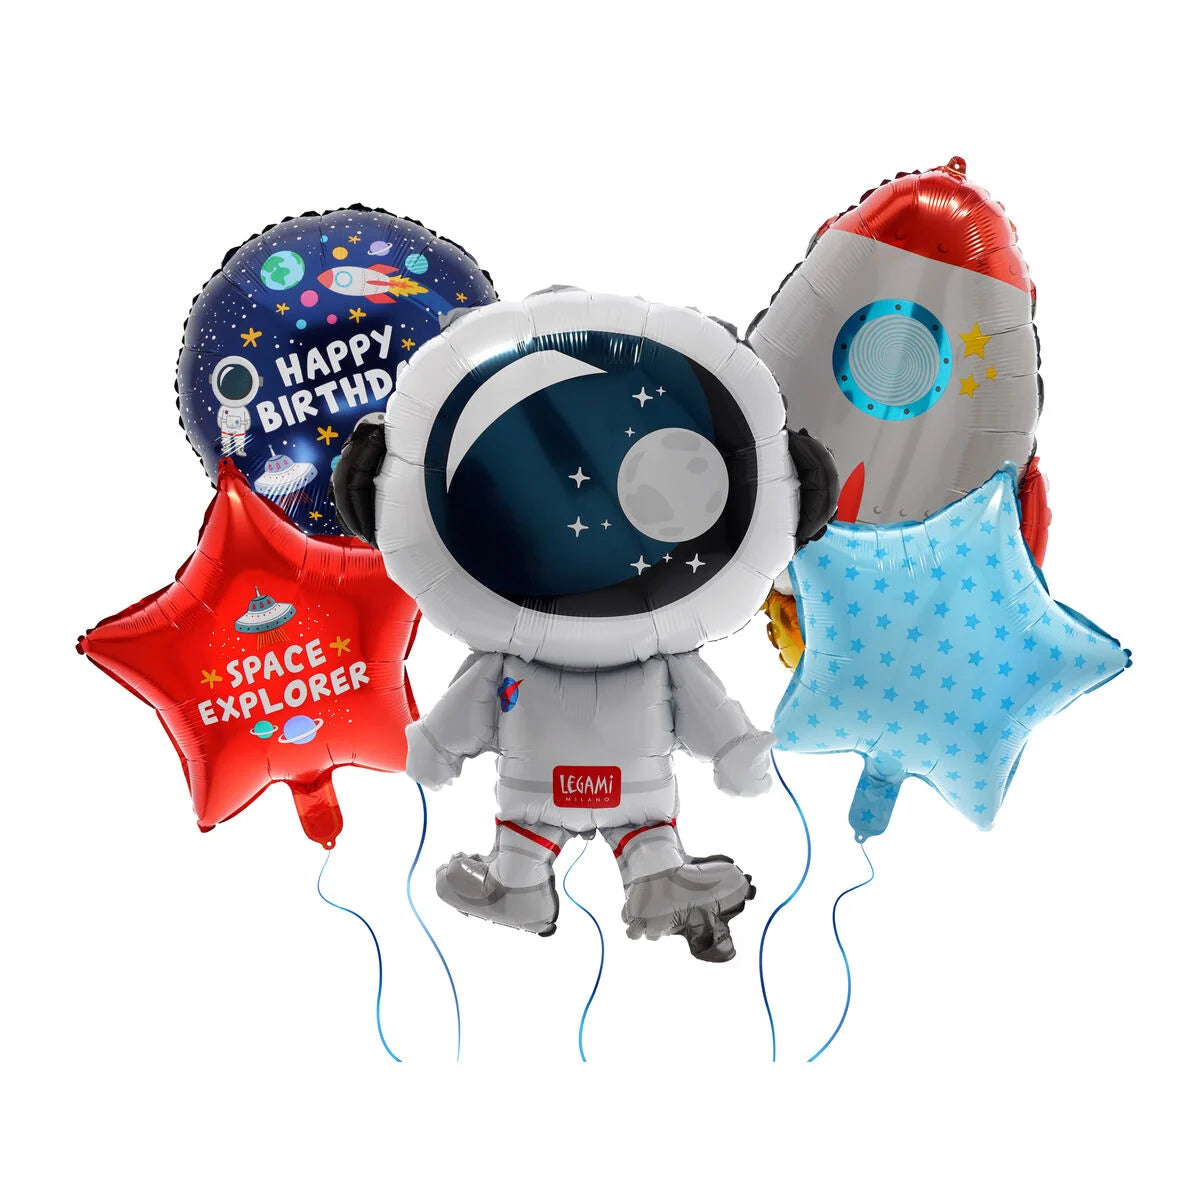 Fabulous Gifts Celebration and Party Legami 5 Birthday Party Balloons - Space by Weirs of Baggot Street